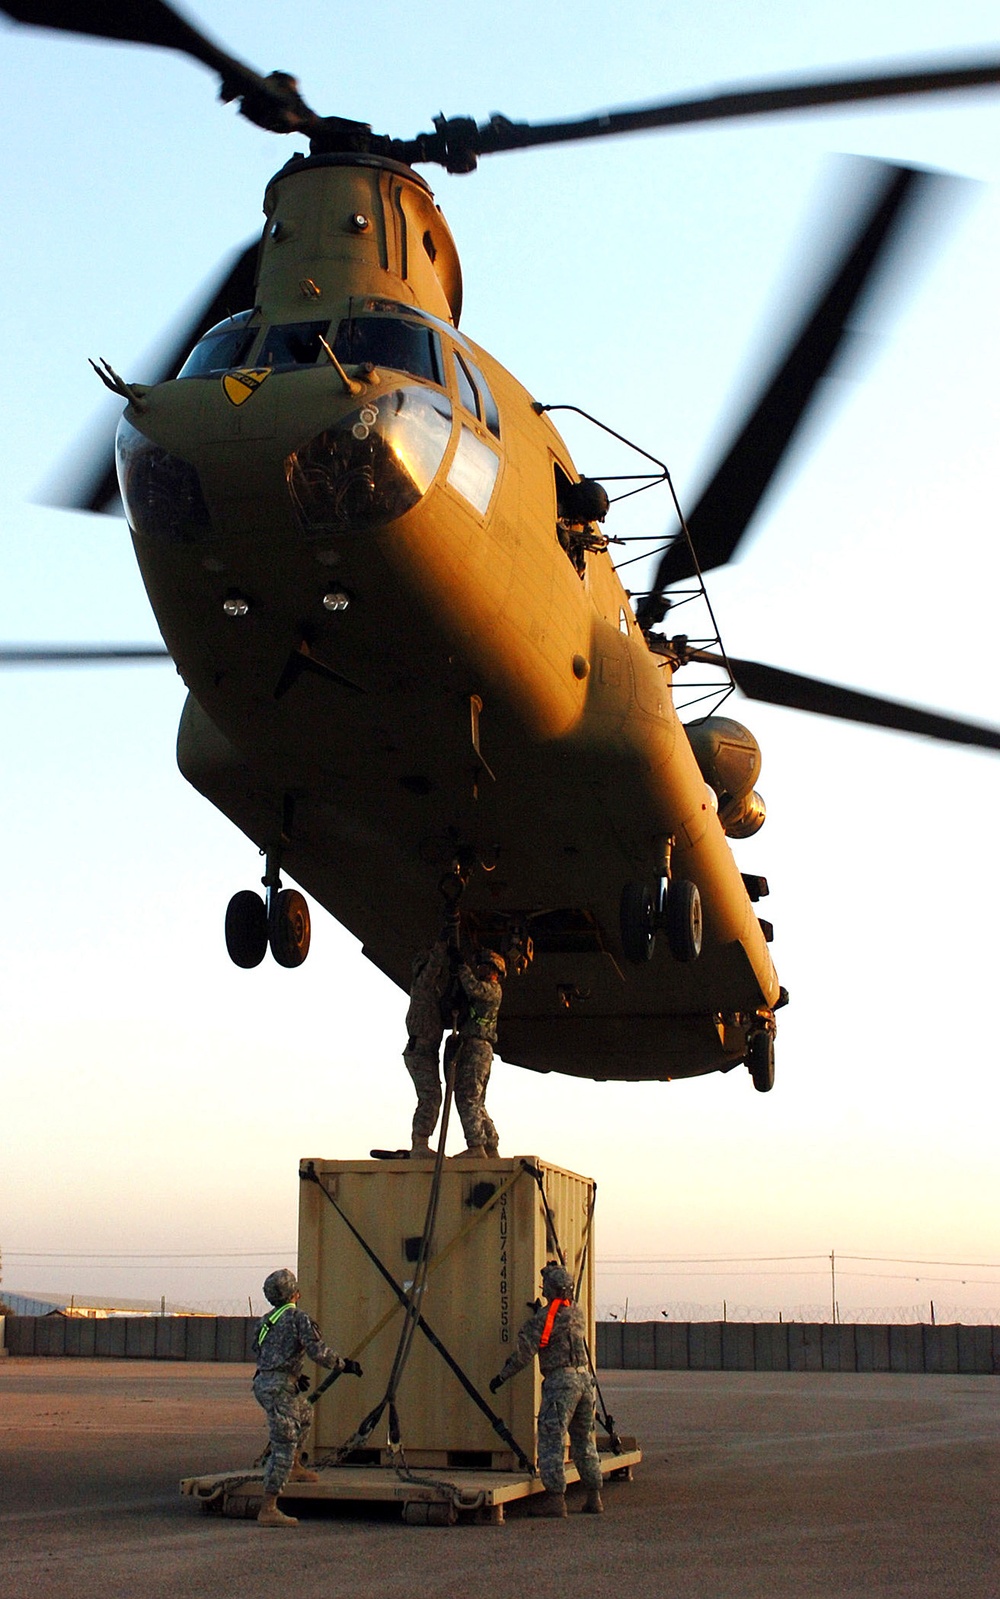 Air Cav undertakes sling load in support of aviation mission